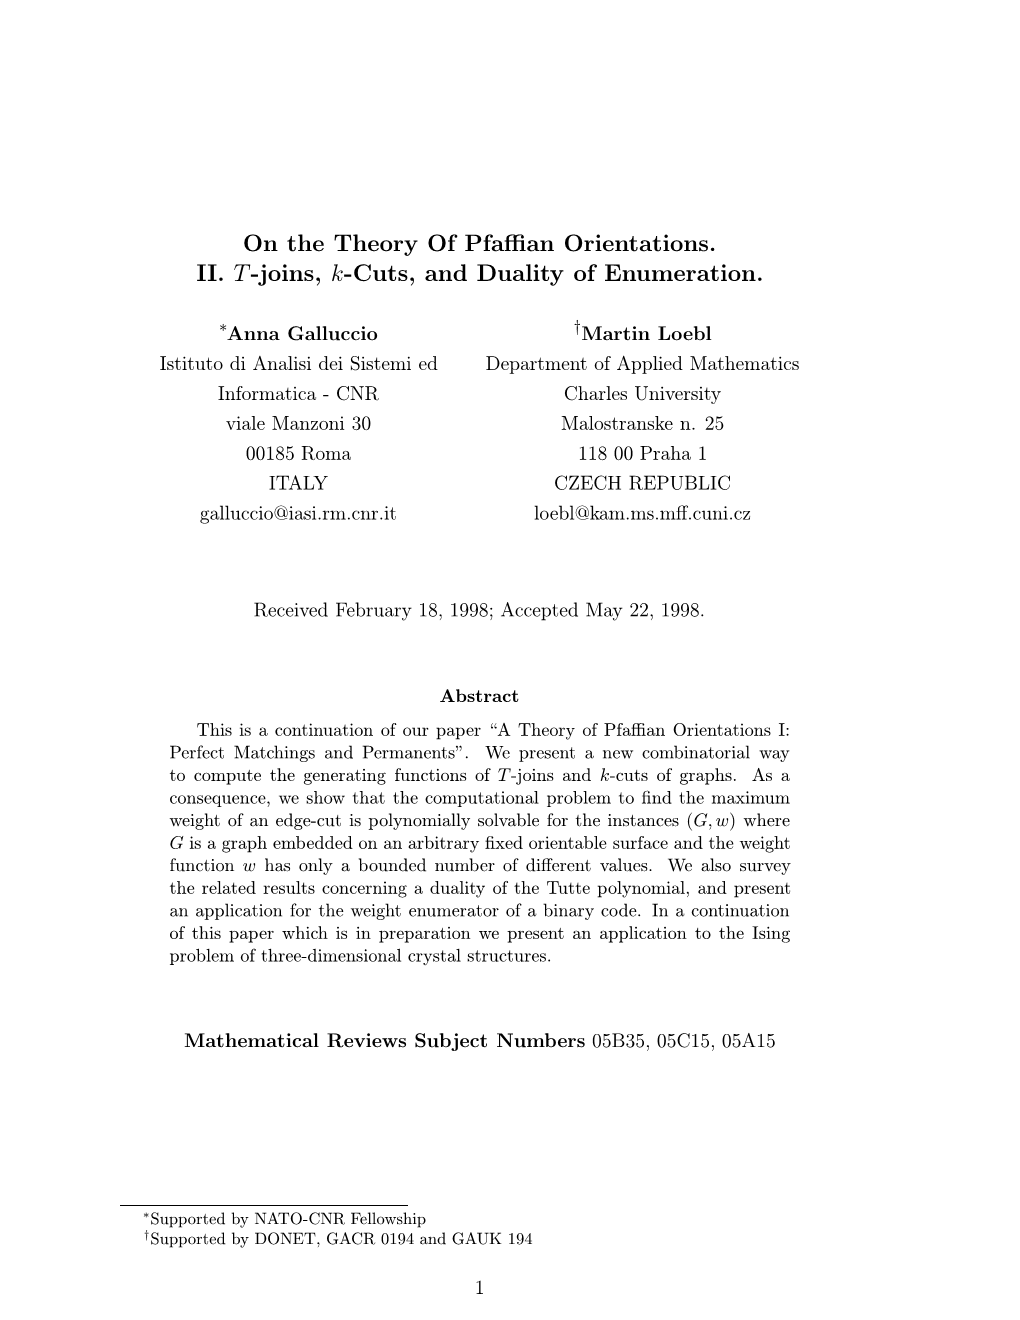 On the Theory of Pfaffian Orientations. II. T-Joins, K-Cuts, And